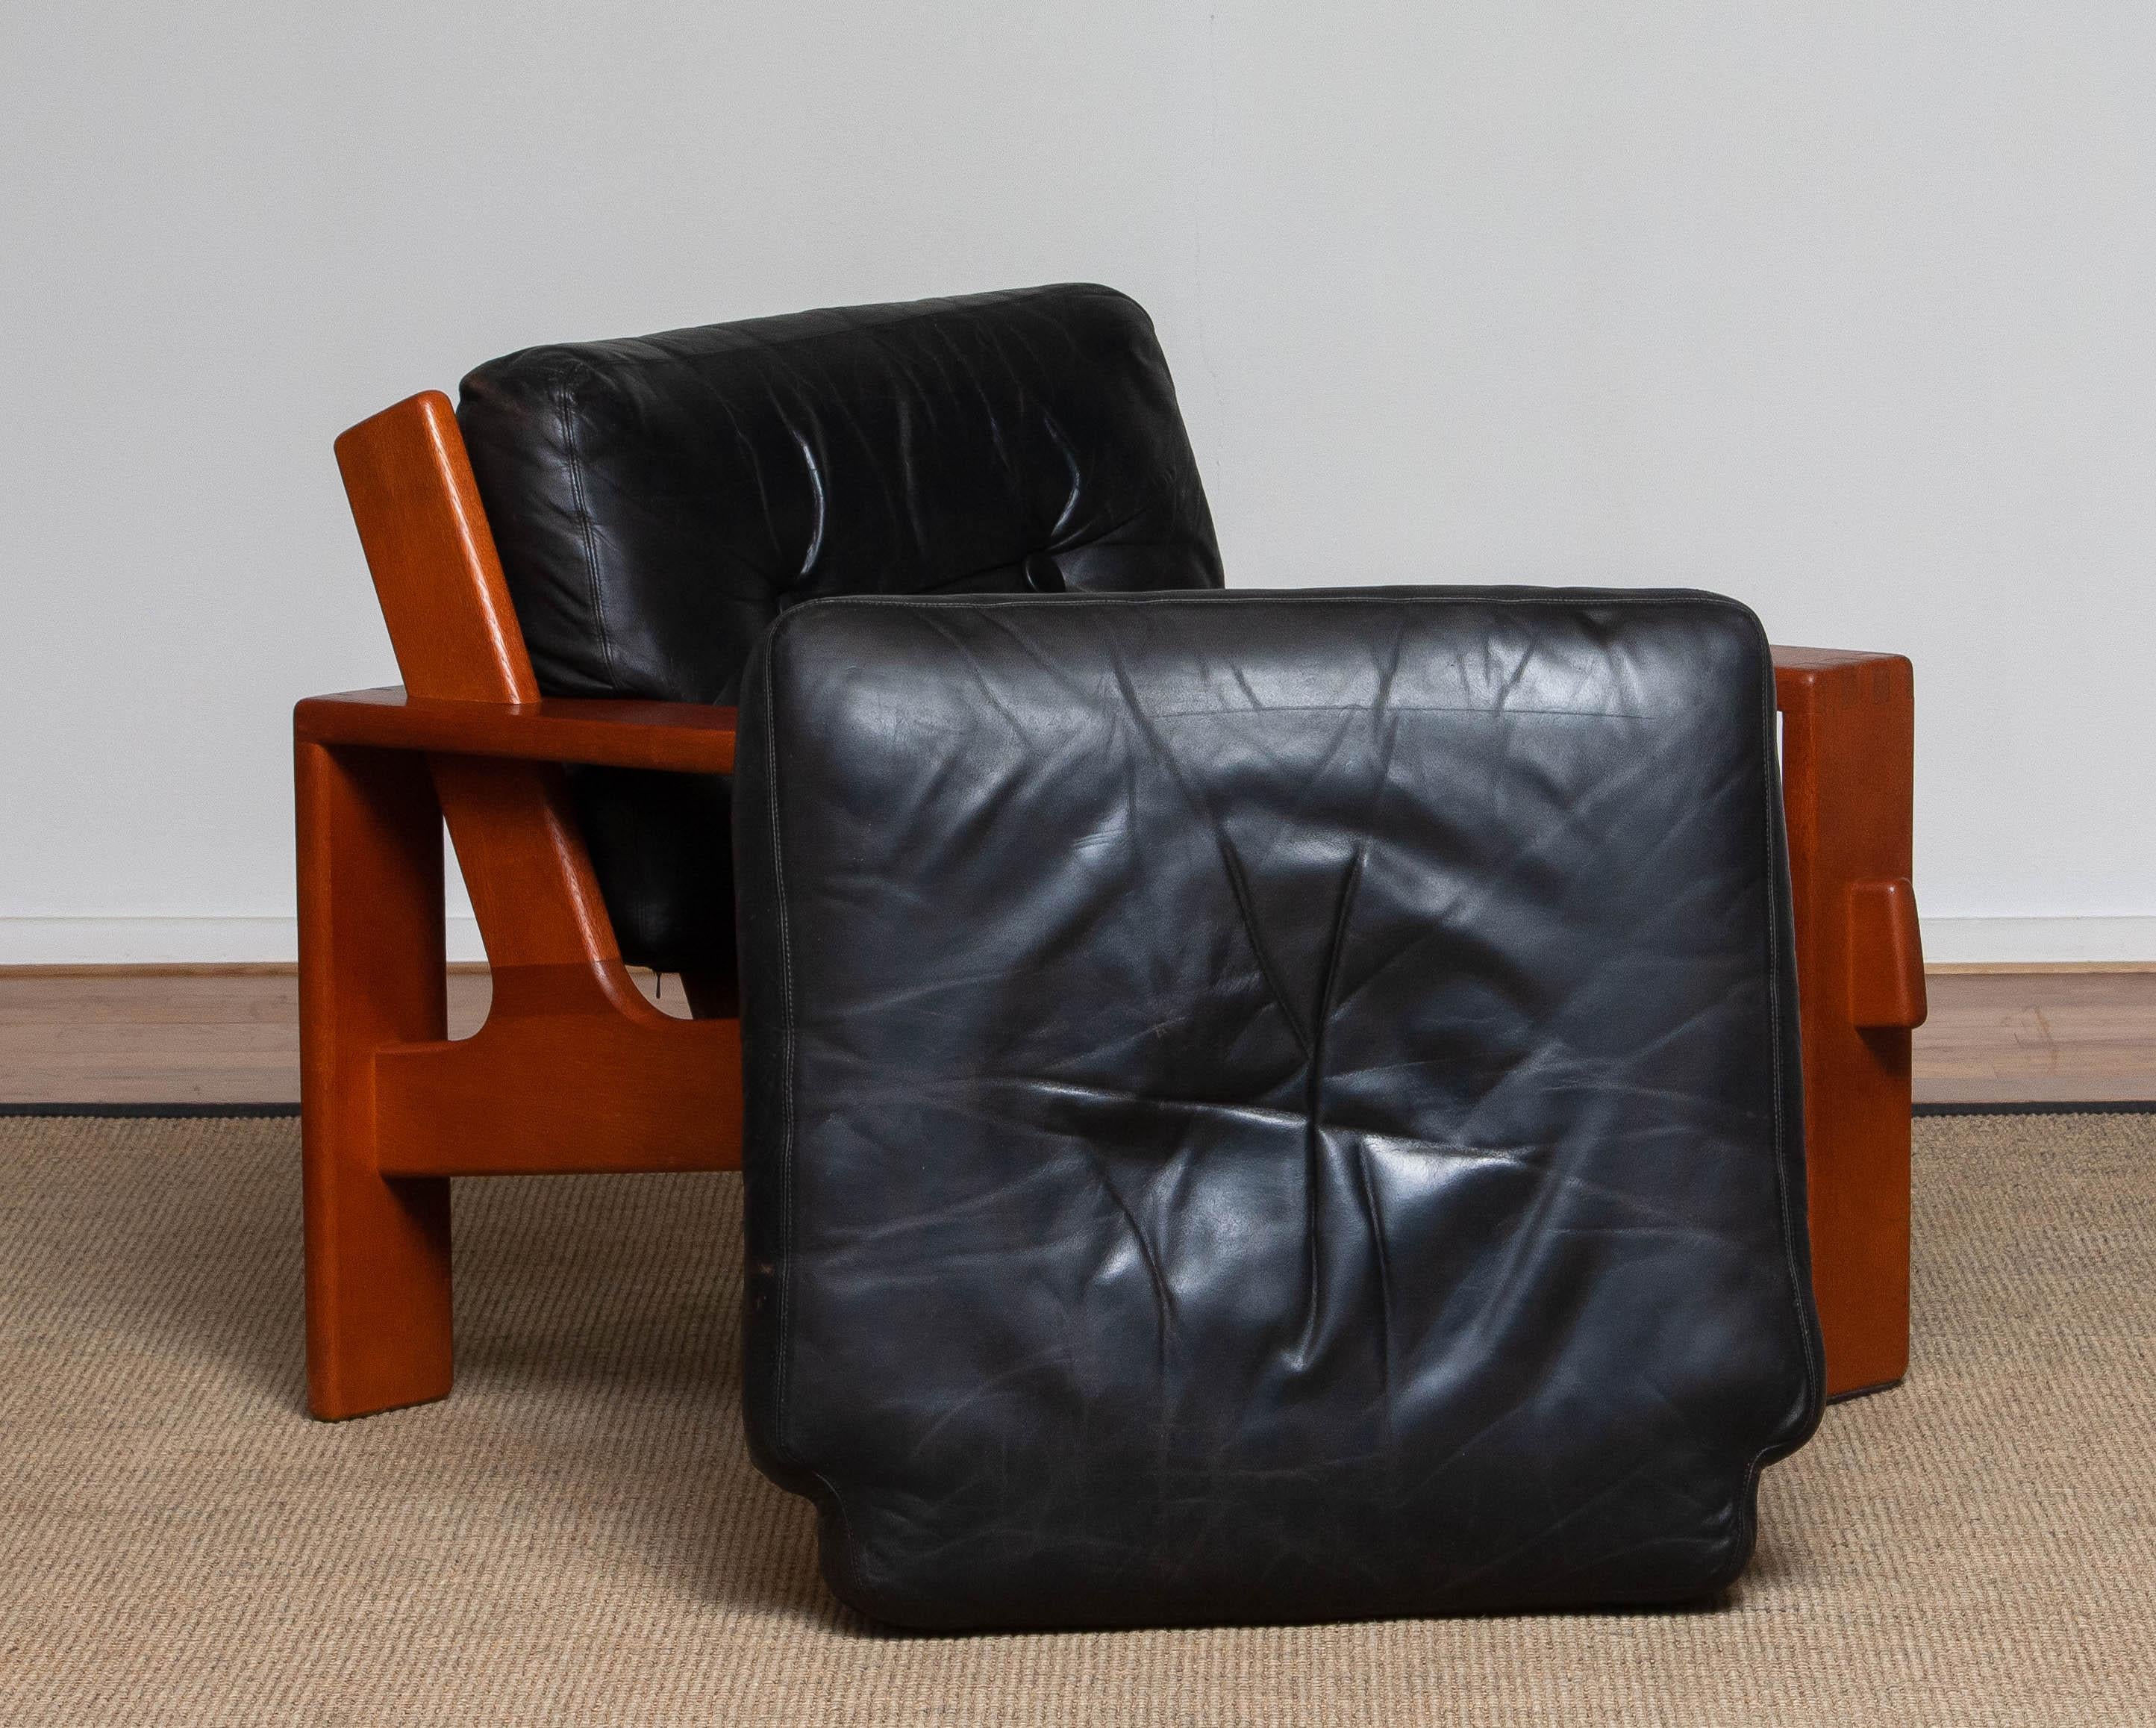 1960s, Teak and Black Leather Cubist Lounge Chair by Esko Pajamies for Asko 3